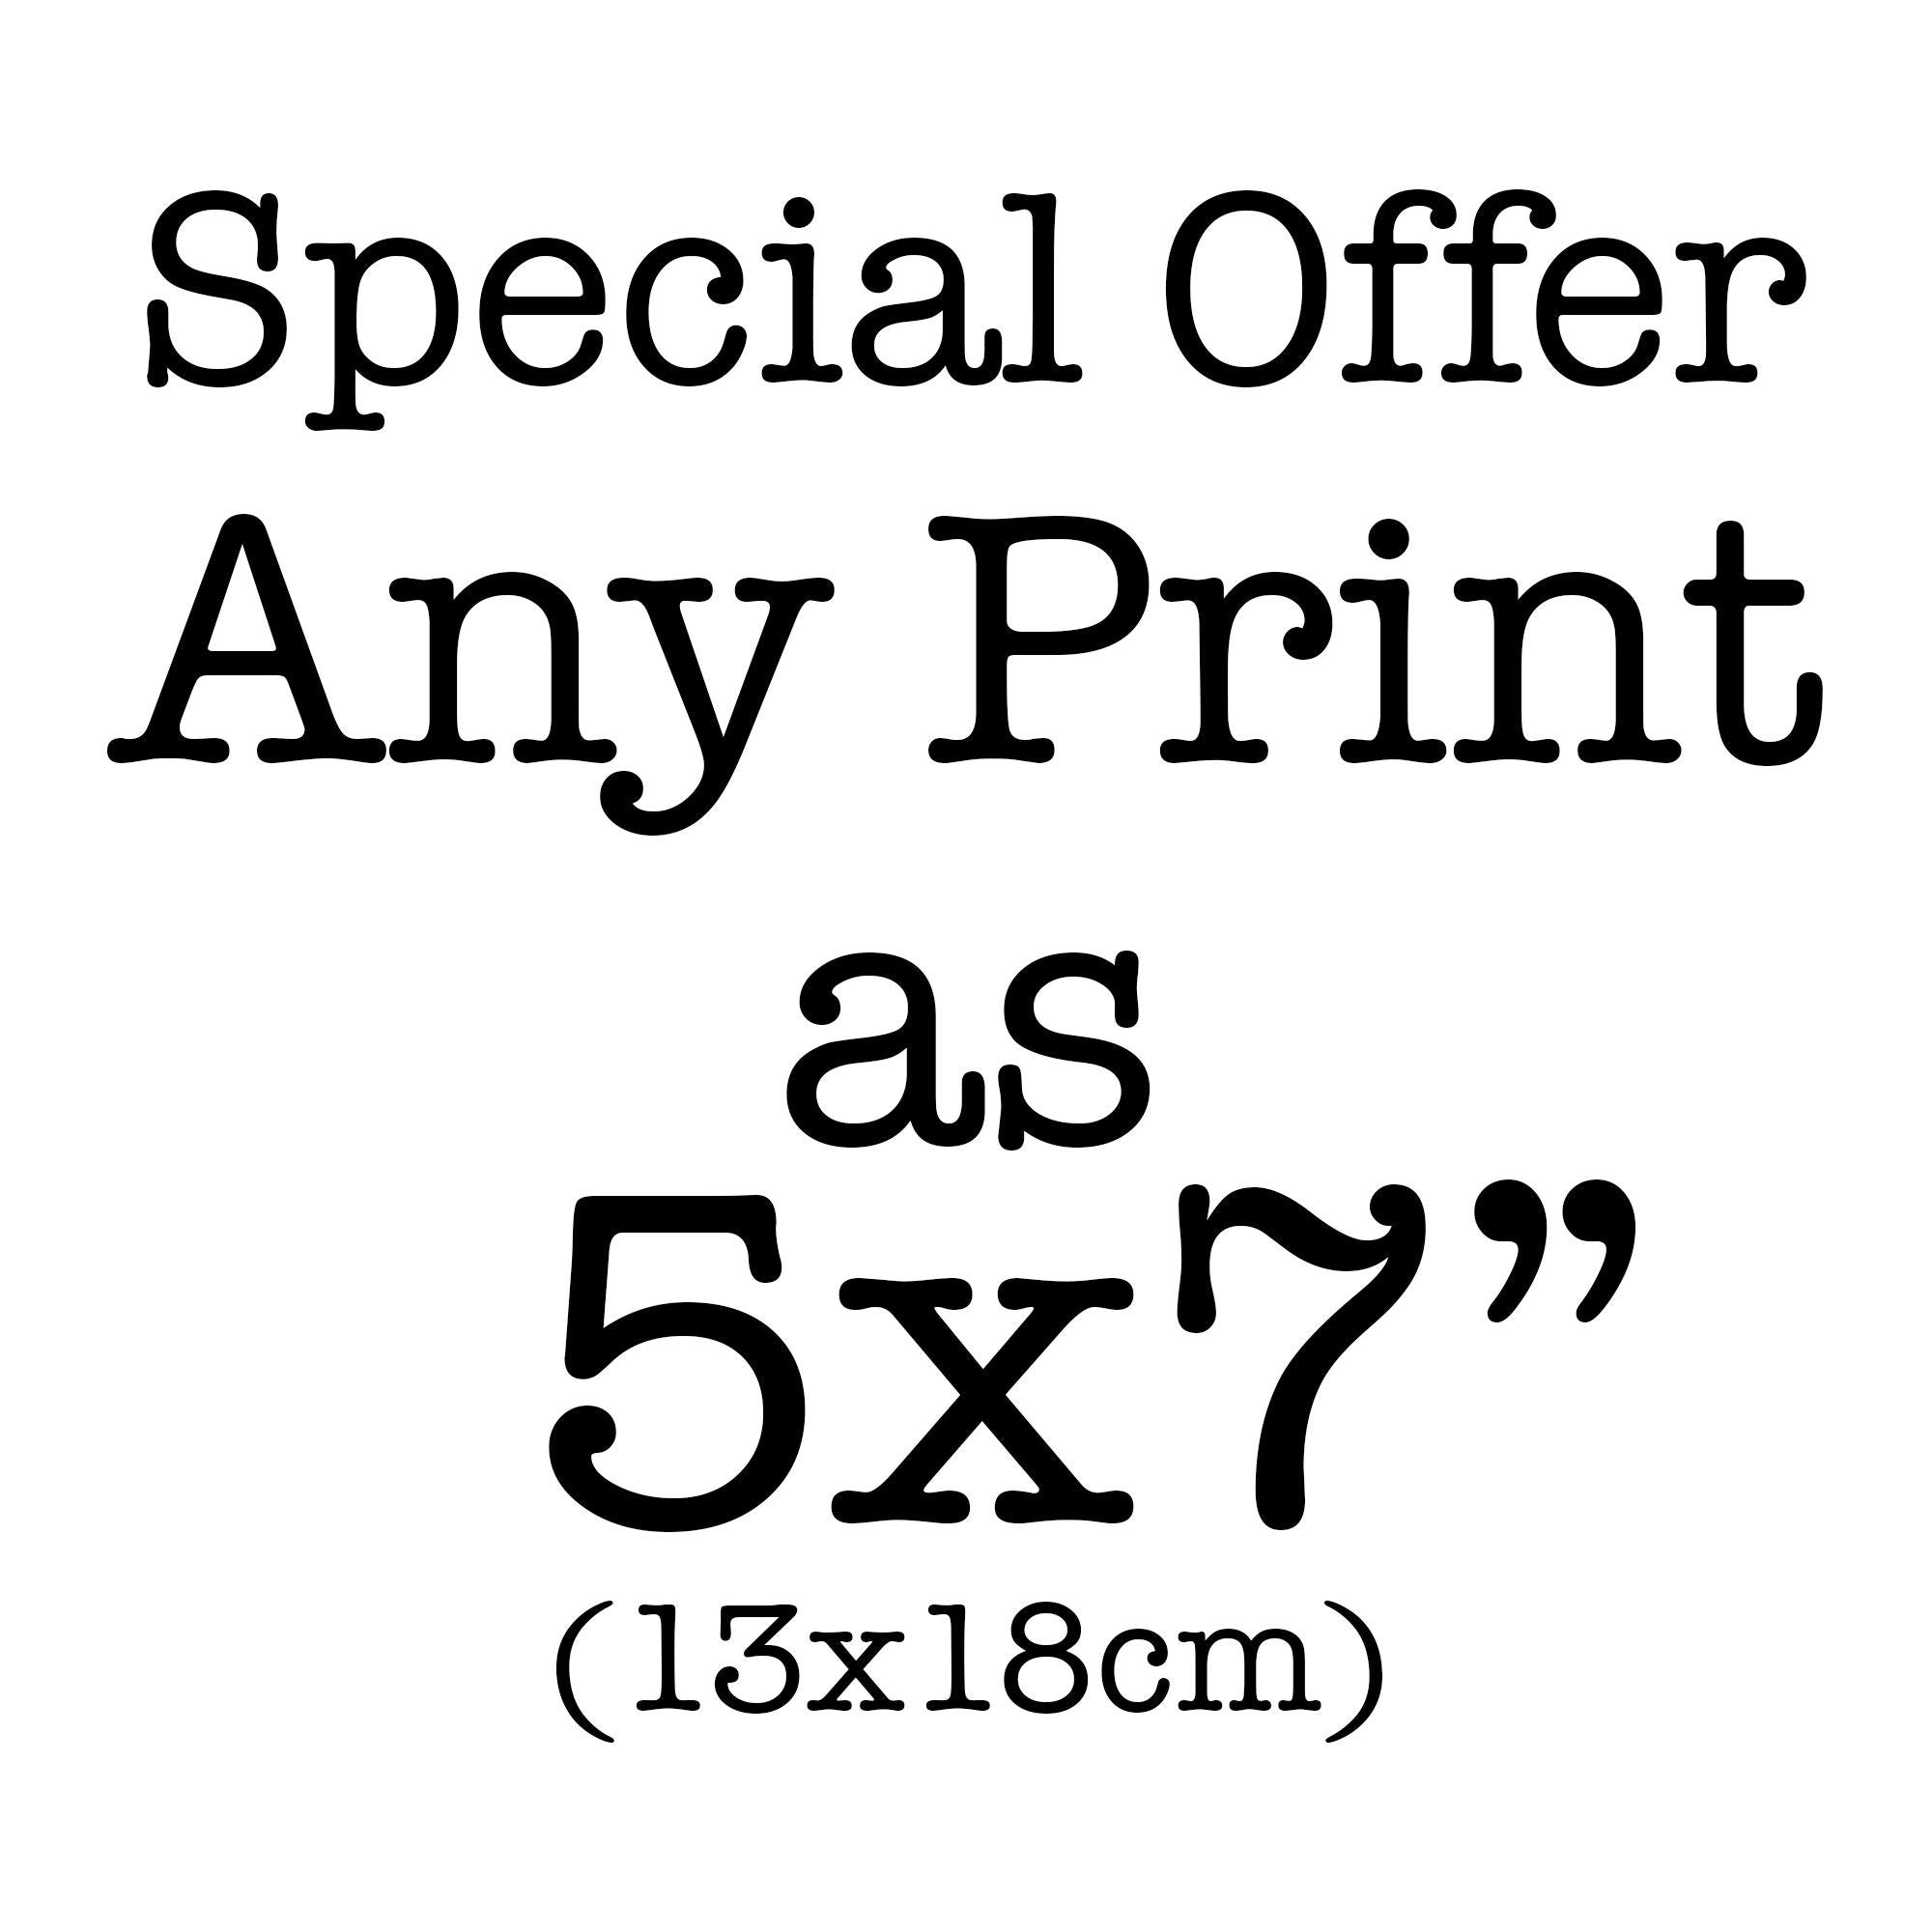 5x7 Art Print for Wall Decor in Black and White, Choose Any Print from Book Quote Decor